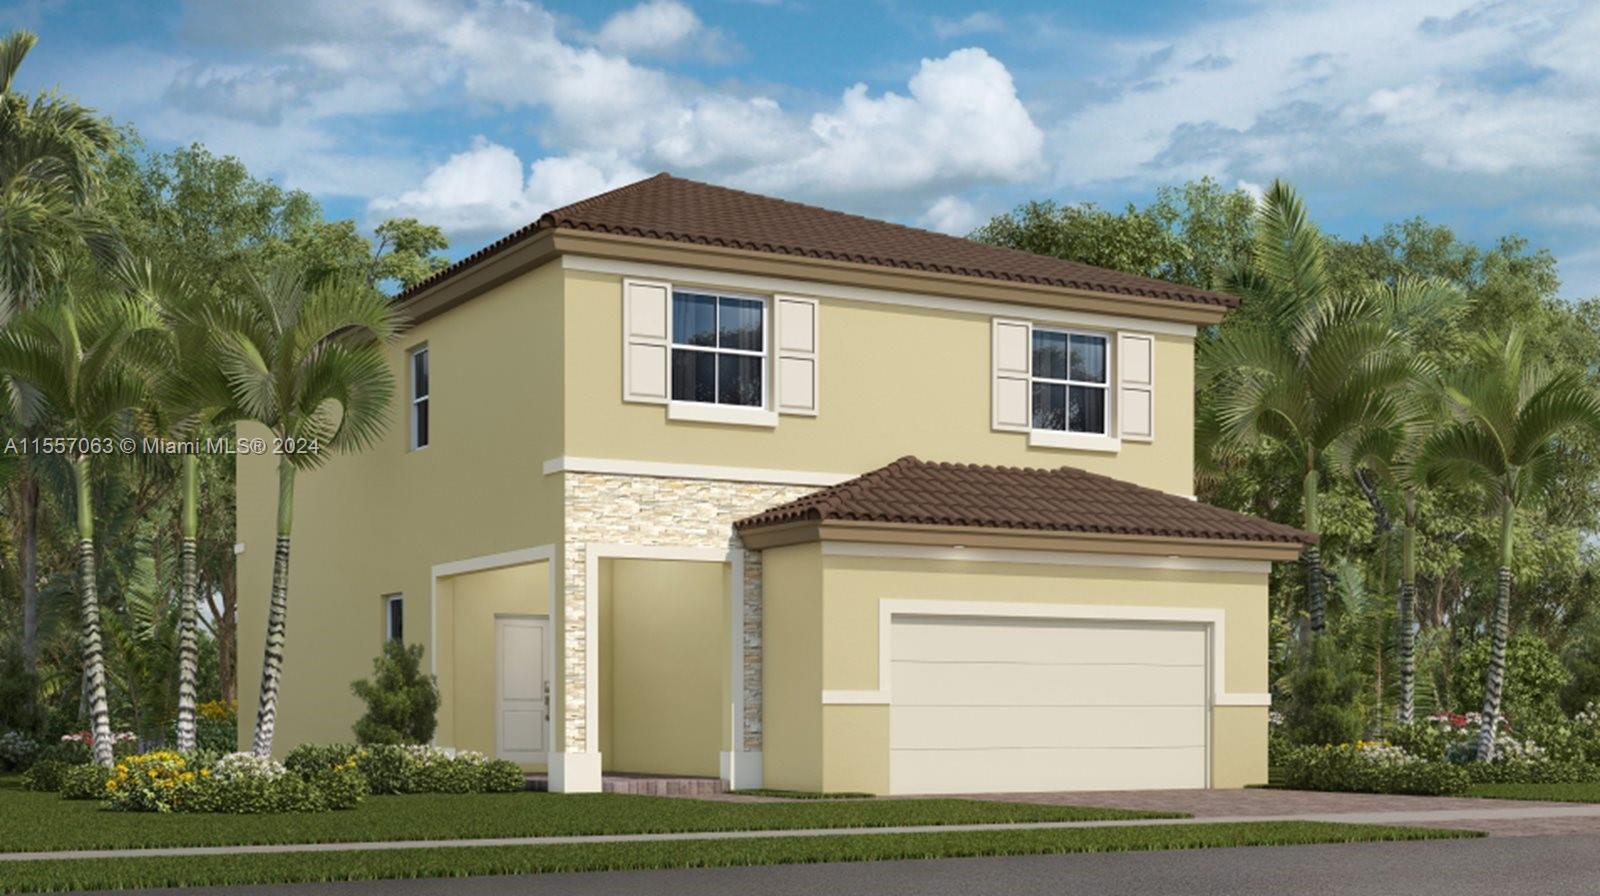 Photo of 2424 SE 24 Ave in Homestead, FL